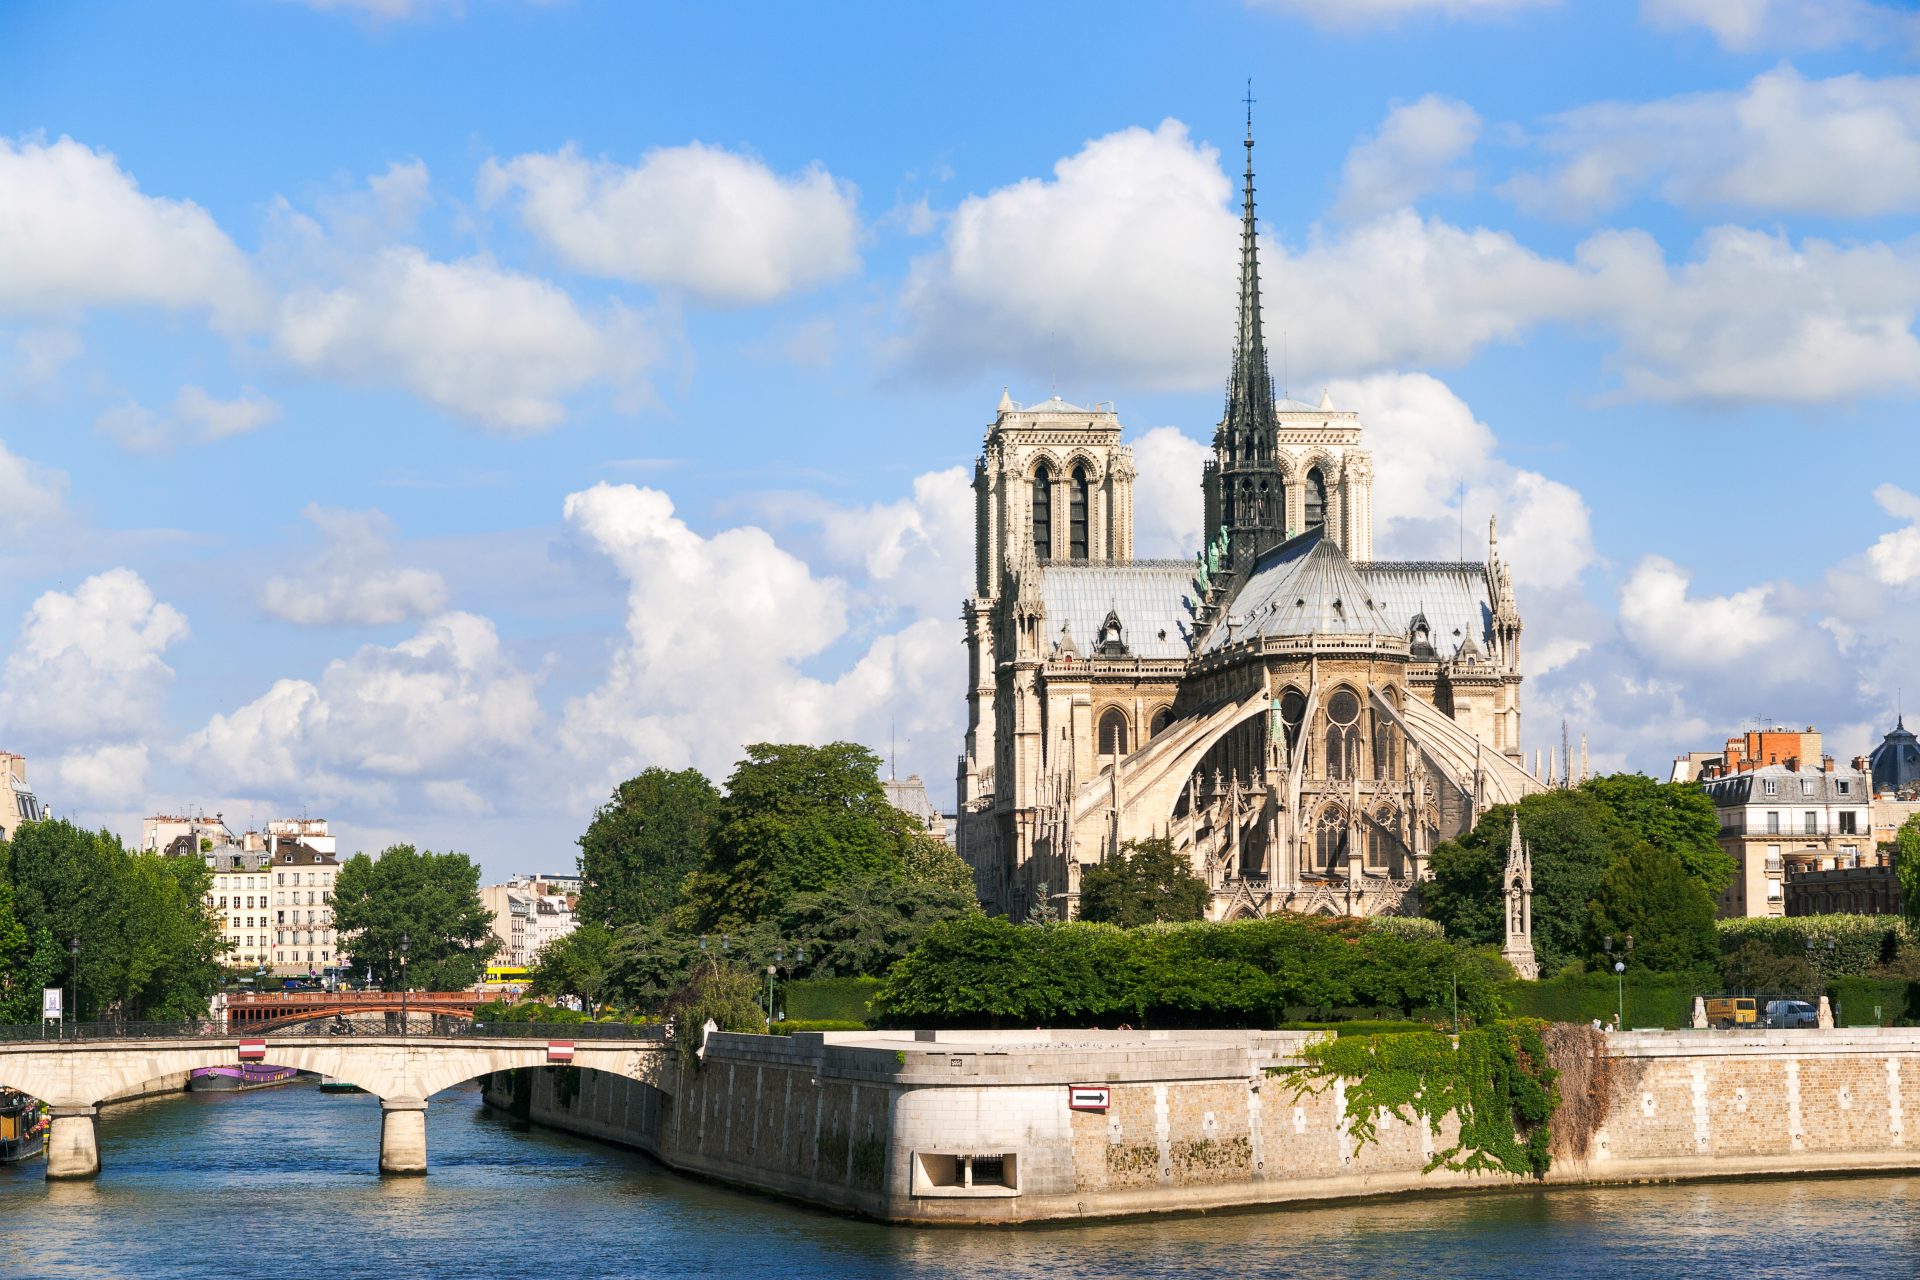 August 14, 1218: a fire ravaged Notre Dame